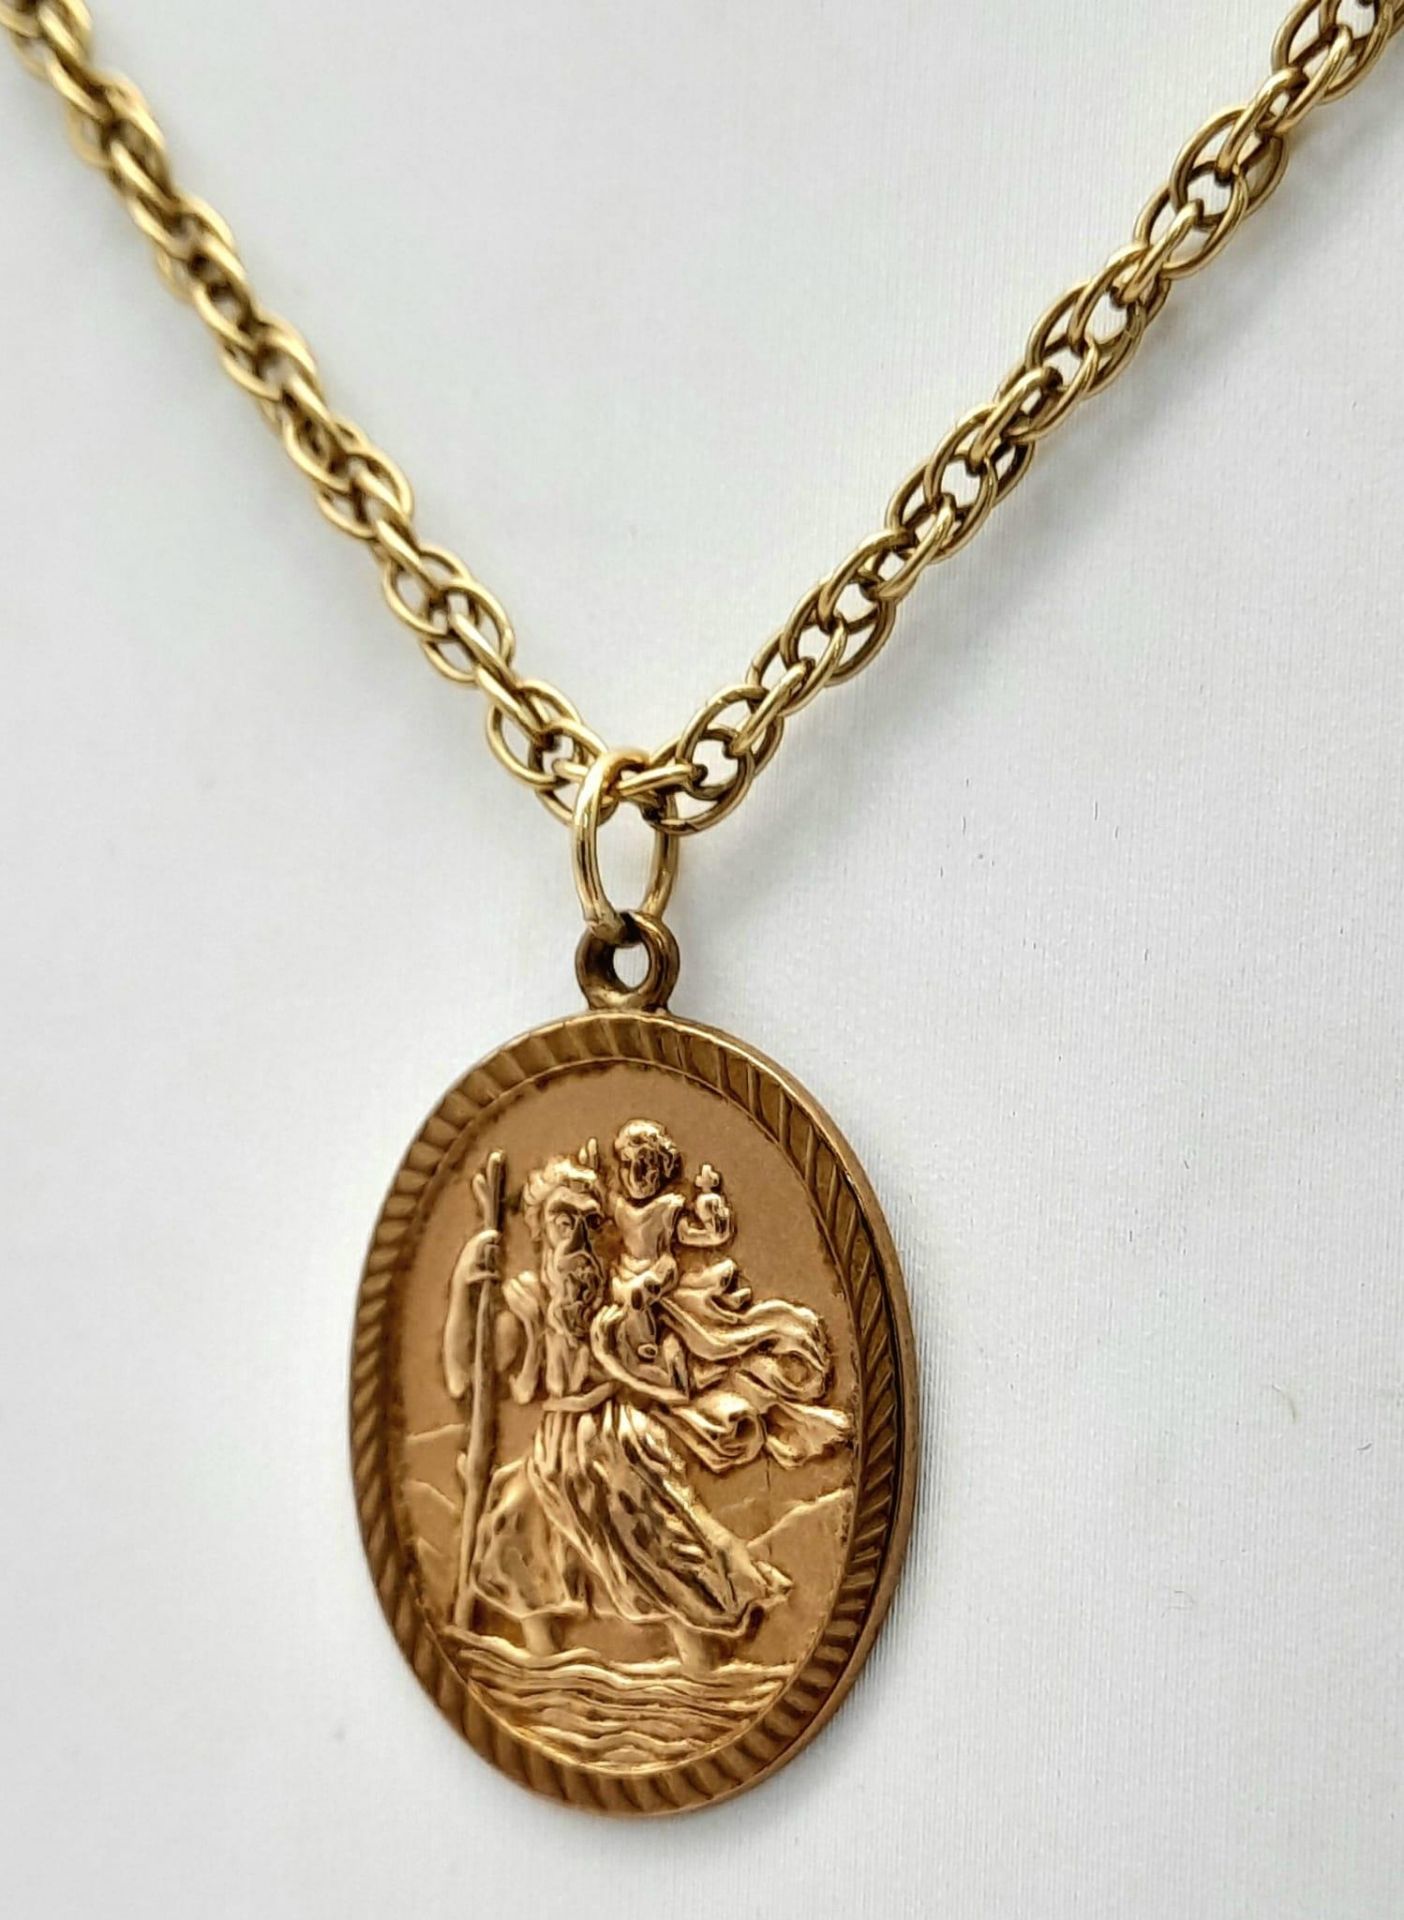 A 9K Gold Oval St. Christopher Pendant on a 9K Yellow Gold Chain/Necklace. 3cm and 64cm. 14.86g